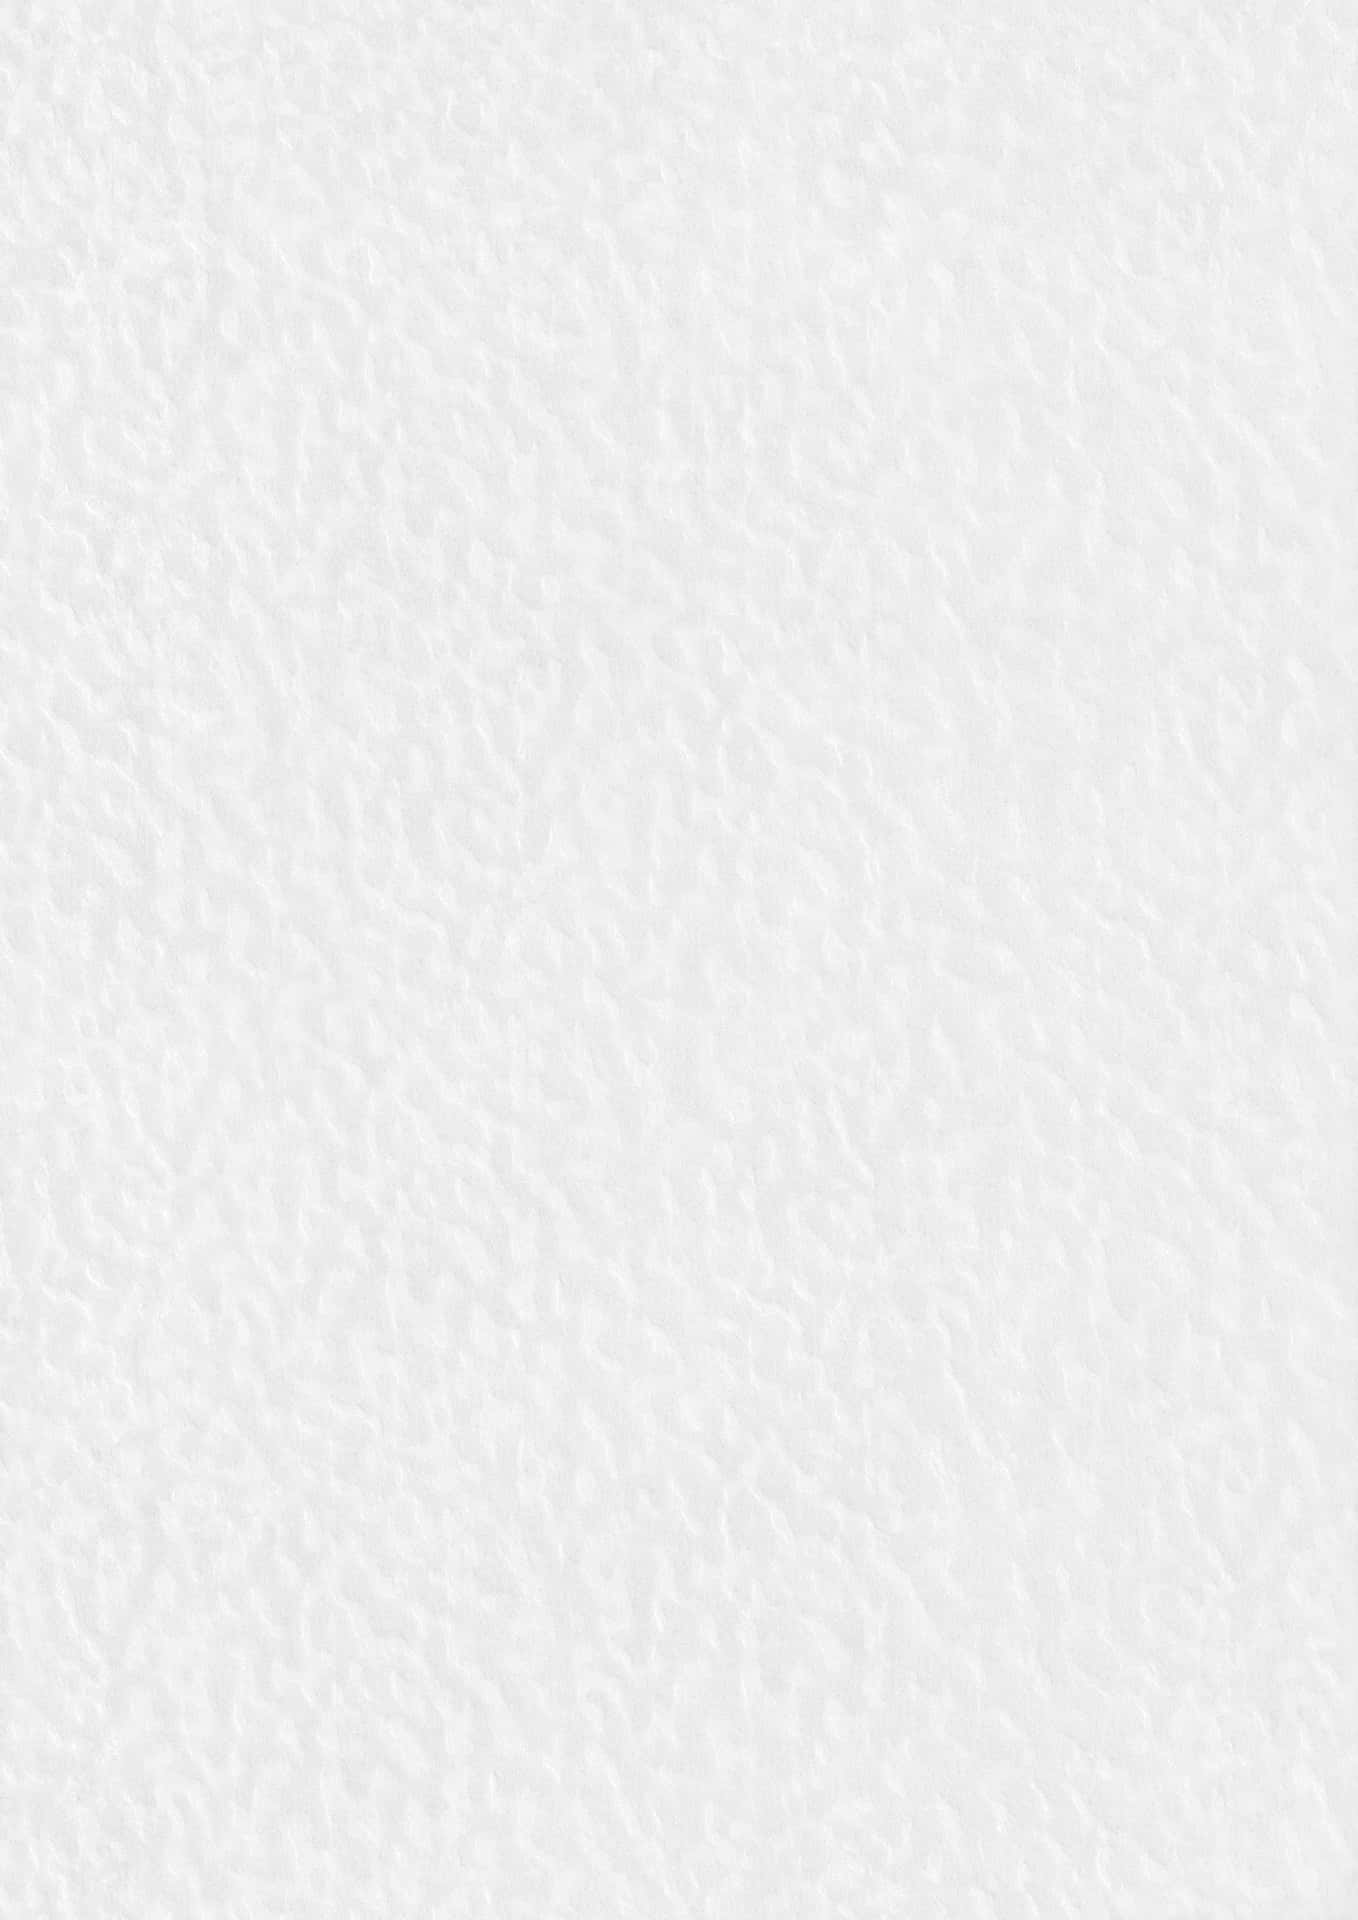 A White Background With A White Texture